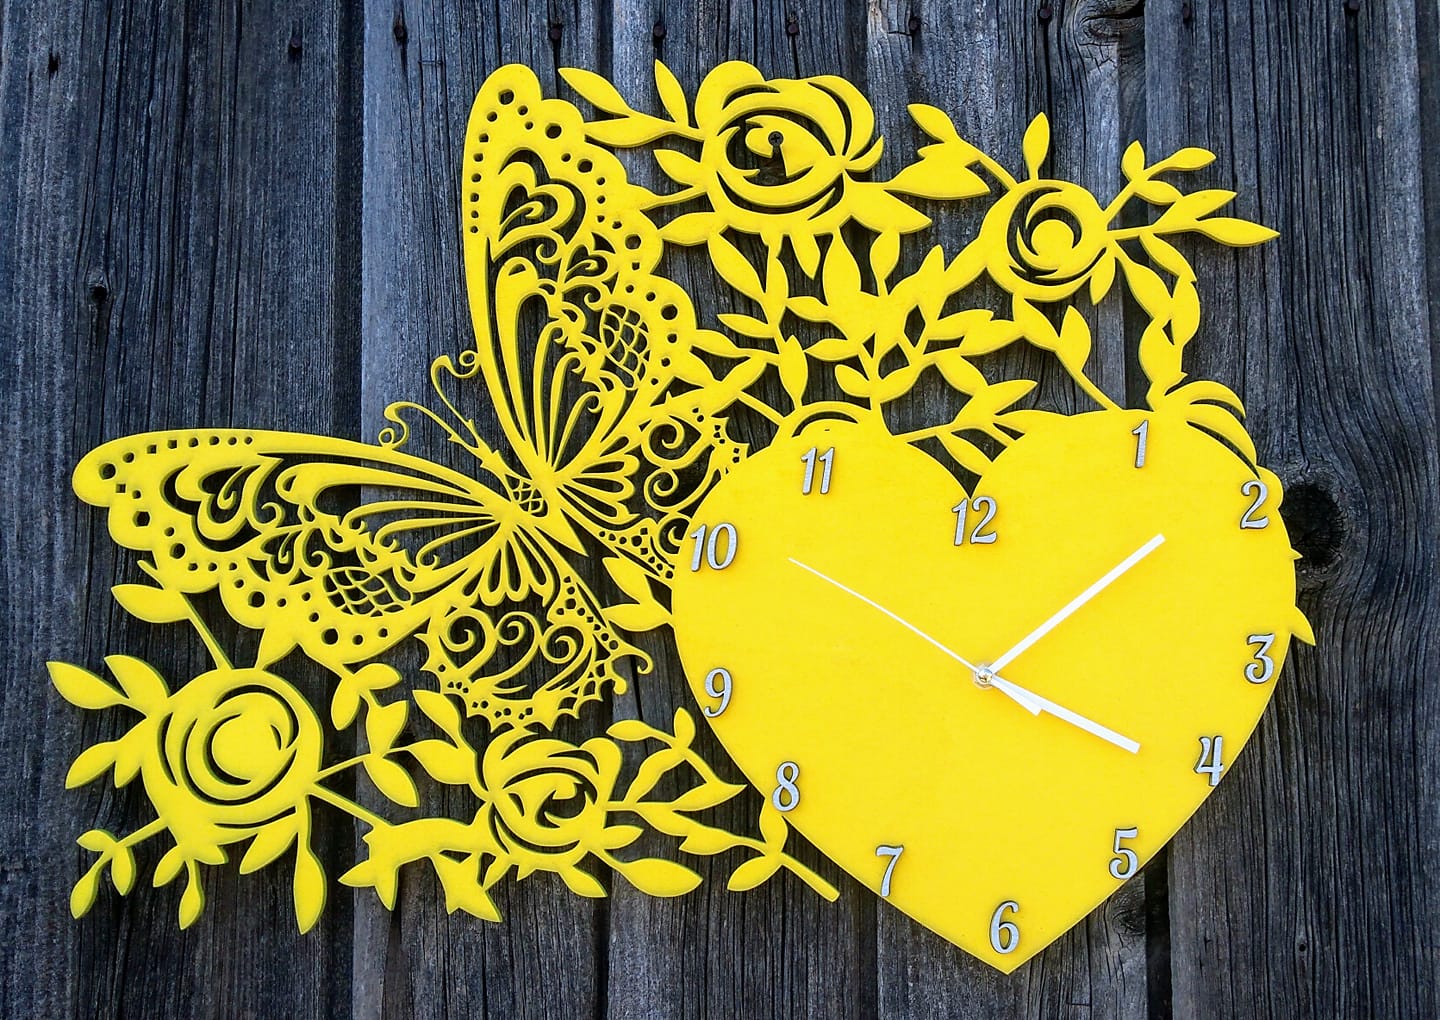 Download Laser Cut Decor Wall Clock With Butterfly Heart And Flowers Free Vector Designs Cnc Free Vectors For All Machines Cutting Laser Router